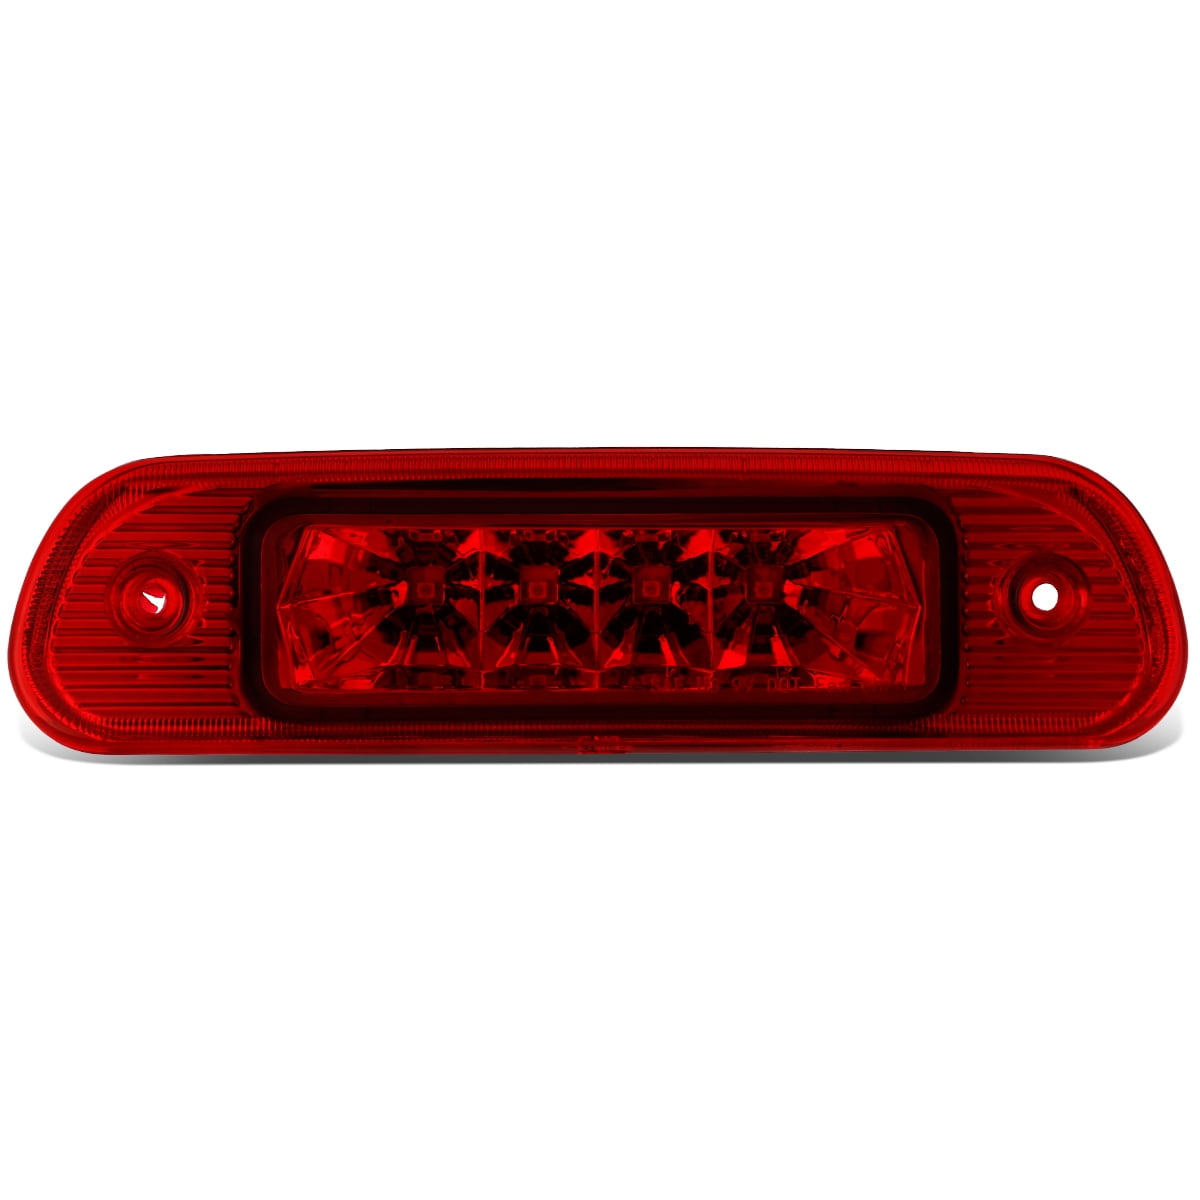 Chrome Housing LED 3rd Third High Mount Rear Brake Light Stop Lamp Replacement for Jeep Grand Cherokee WJ 99-04 